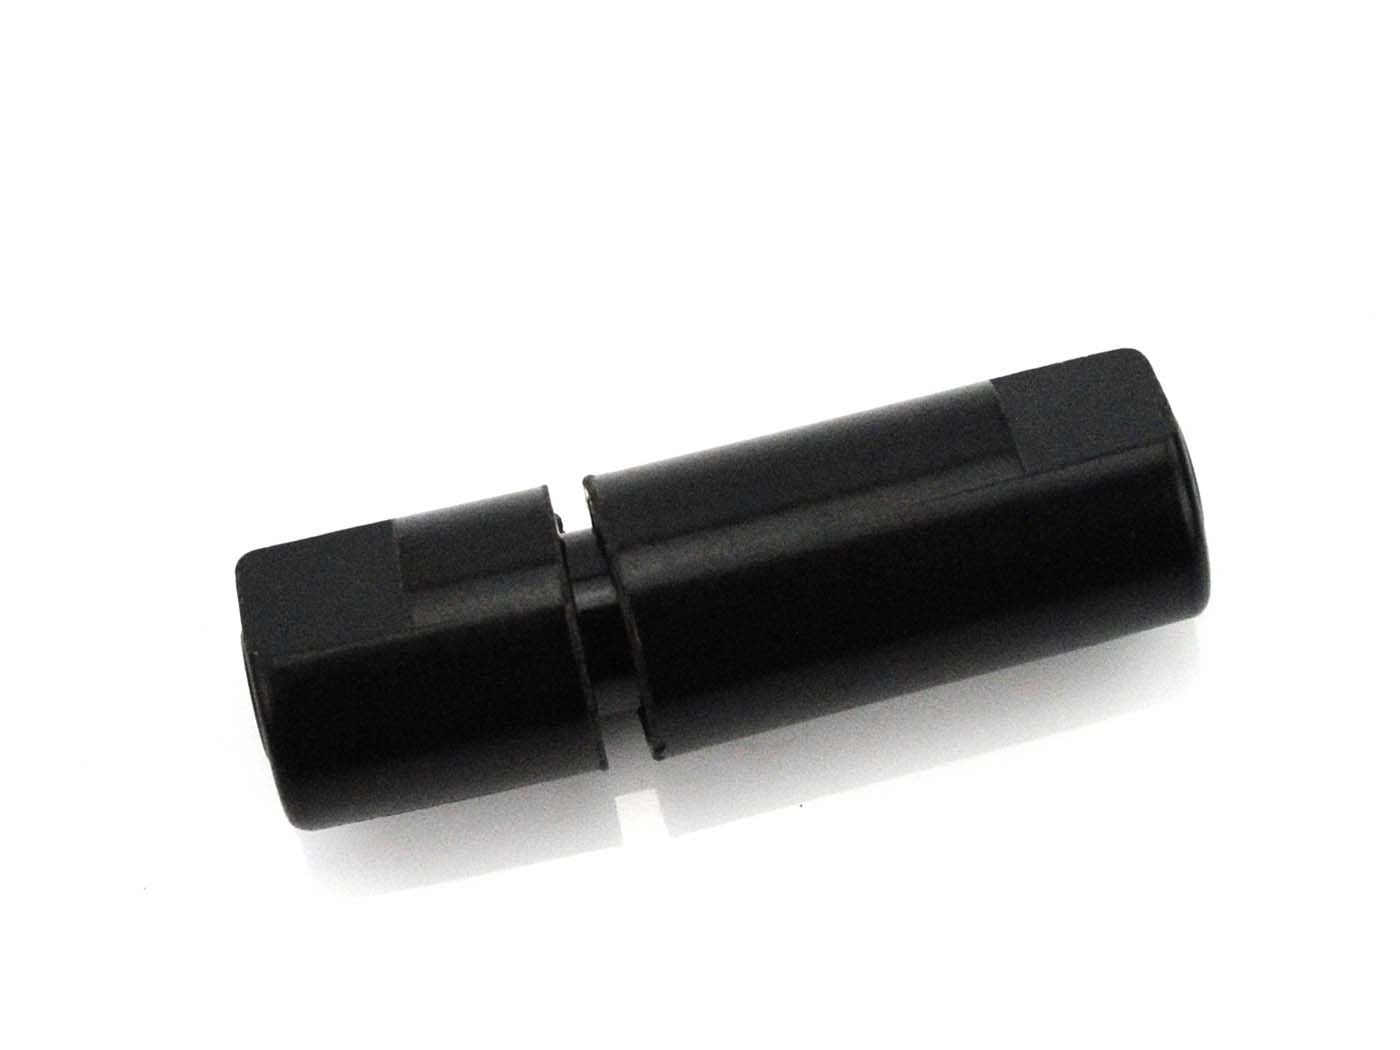 Fuse Holder Fuse Diameter 14mm Length 46mm For Moped, Motorcycle, Scooter, Car